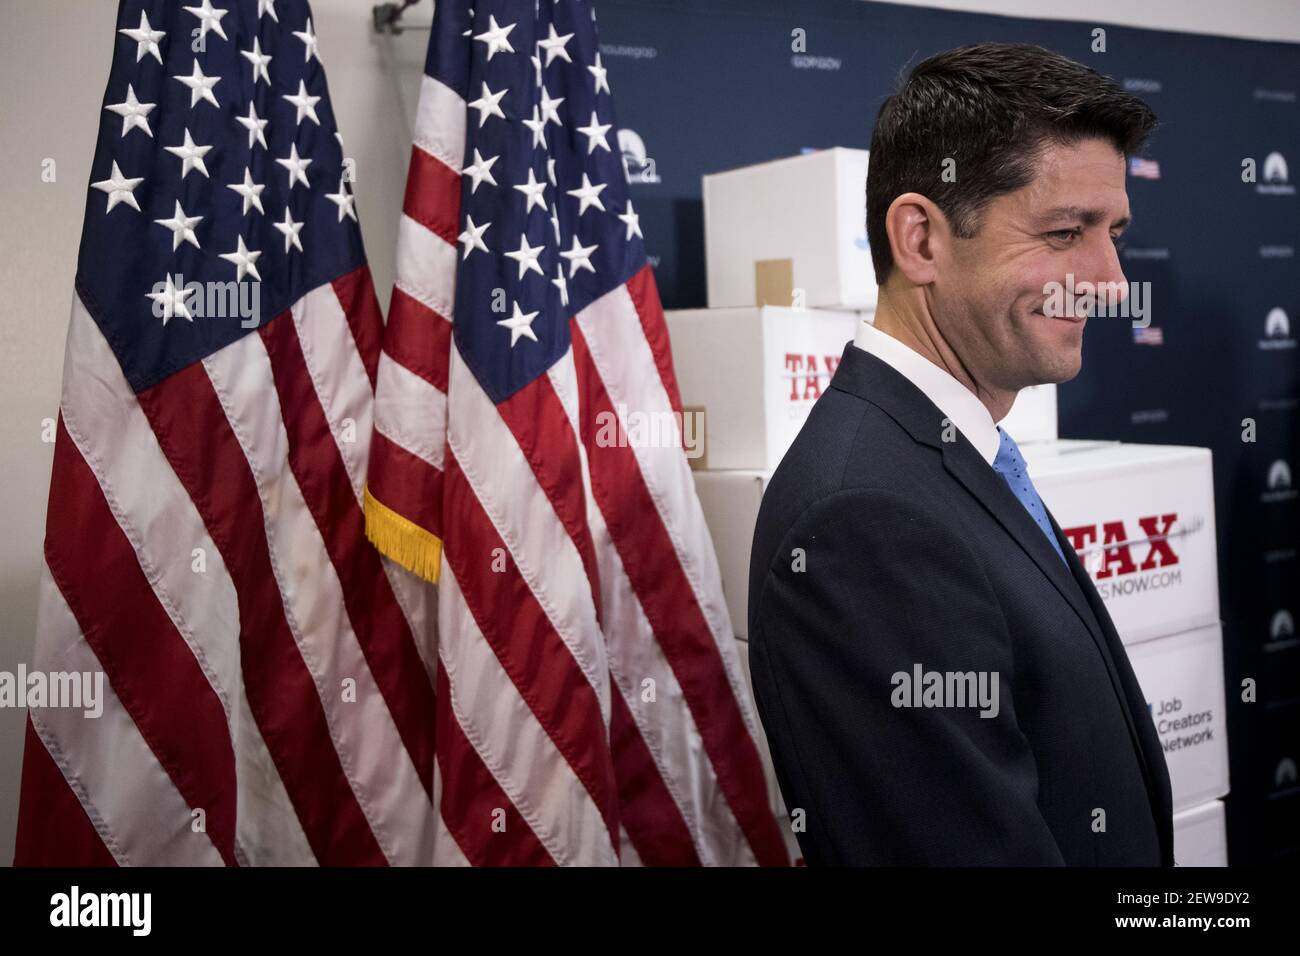 UNITED STATES - NOVEMBER 14: Speaker of the House Paul Ryan, R-Wisc., stands in front of boxes of tax reform petitions during the press conference following the House Republican Conference meeting in the Capitol on Tuesday, Nov. 14, 2017. (Photo By Bill Clark/CQ Roll Call) Stock Photo